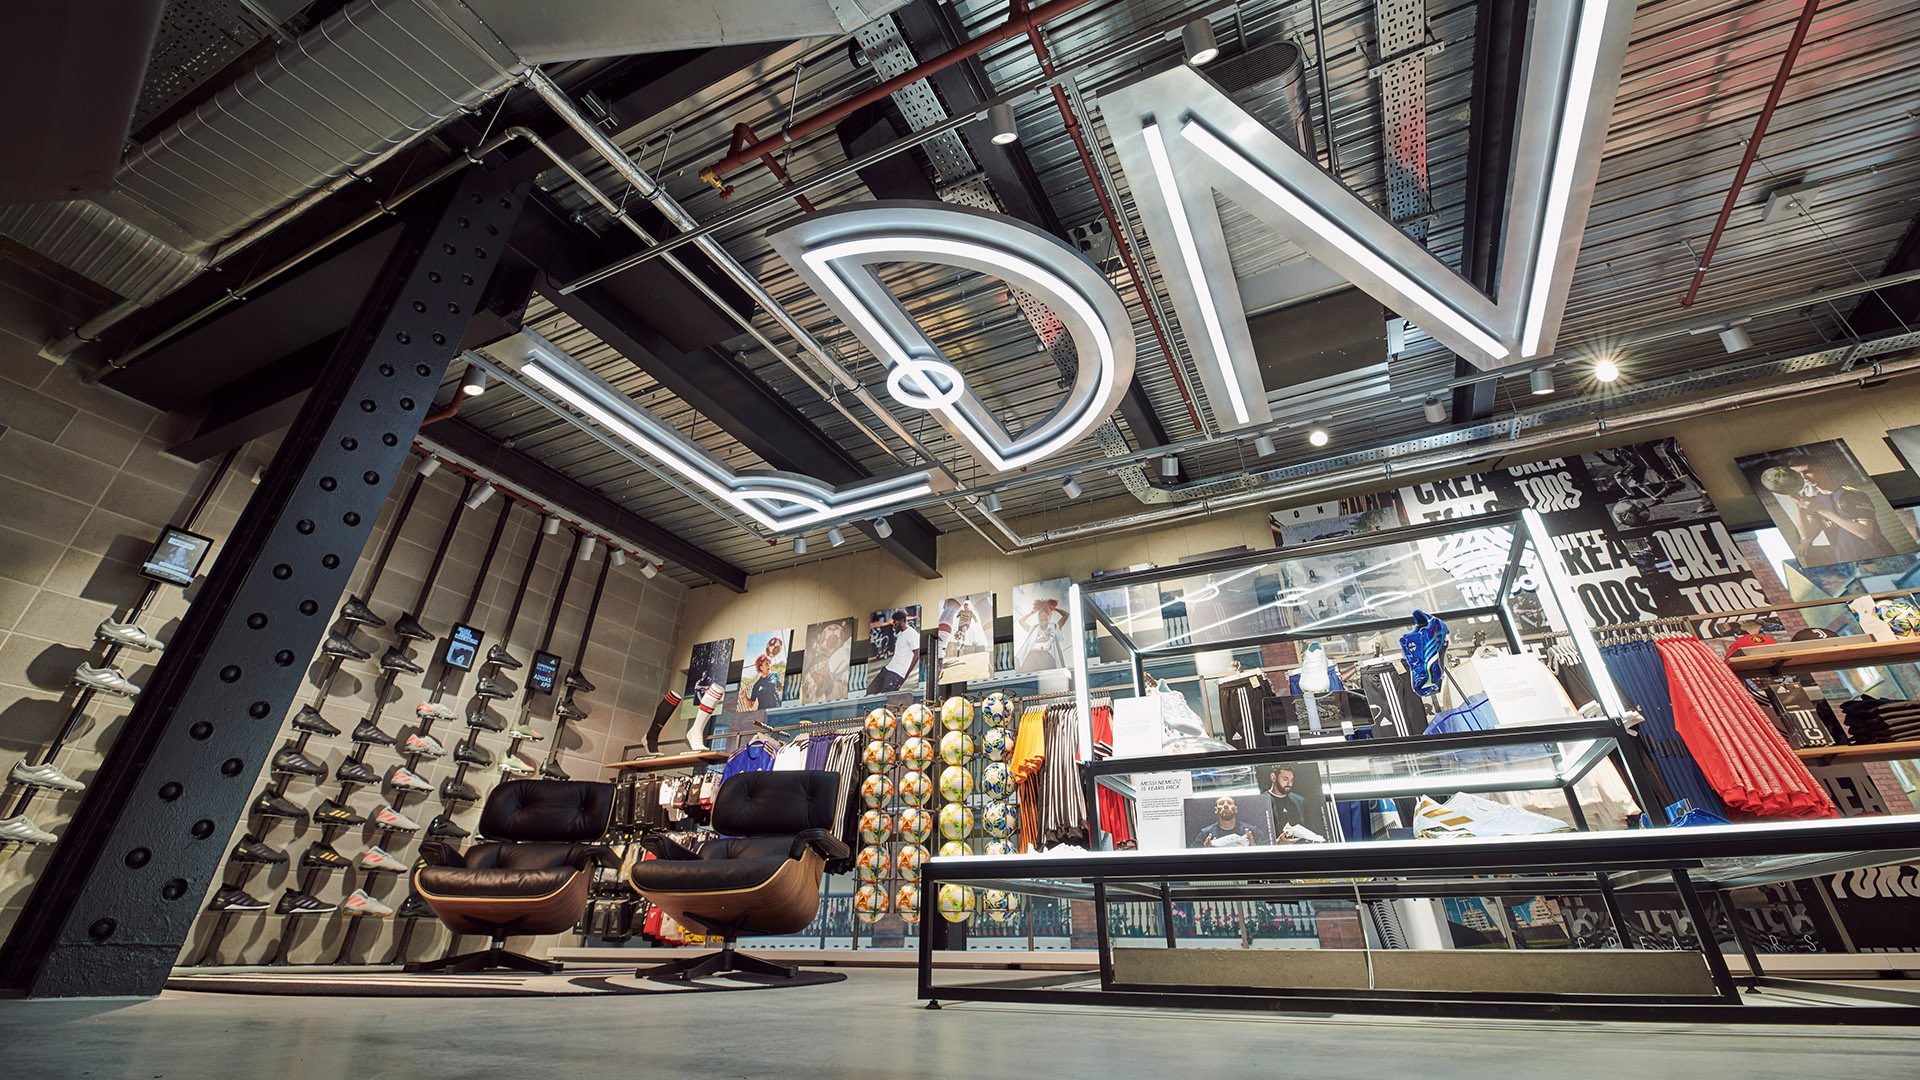 The Most Digital adidas Store to Date 